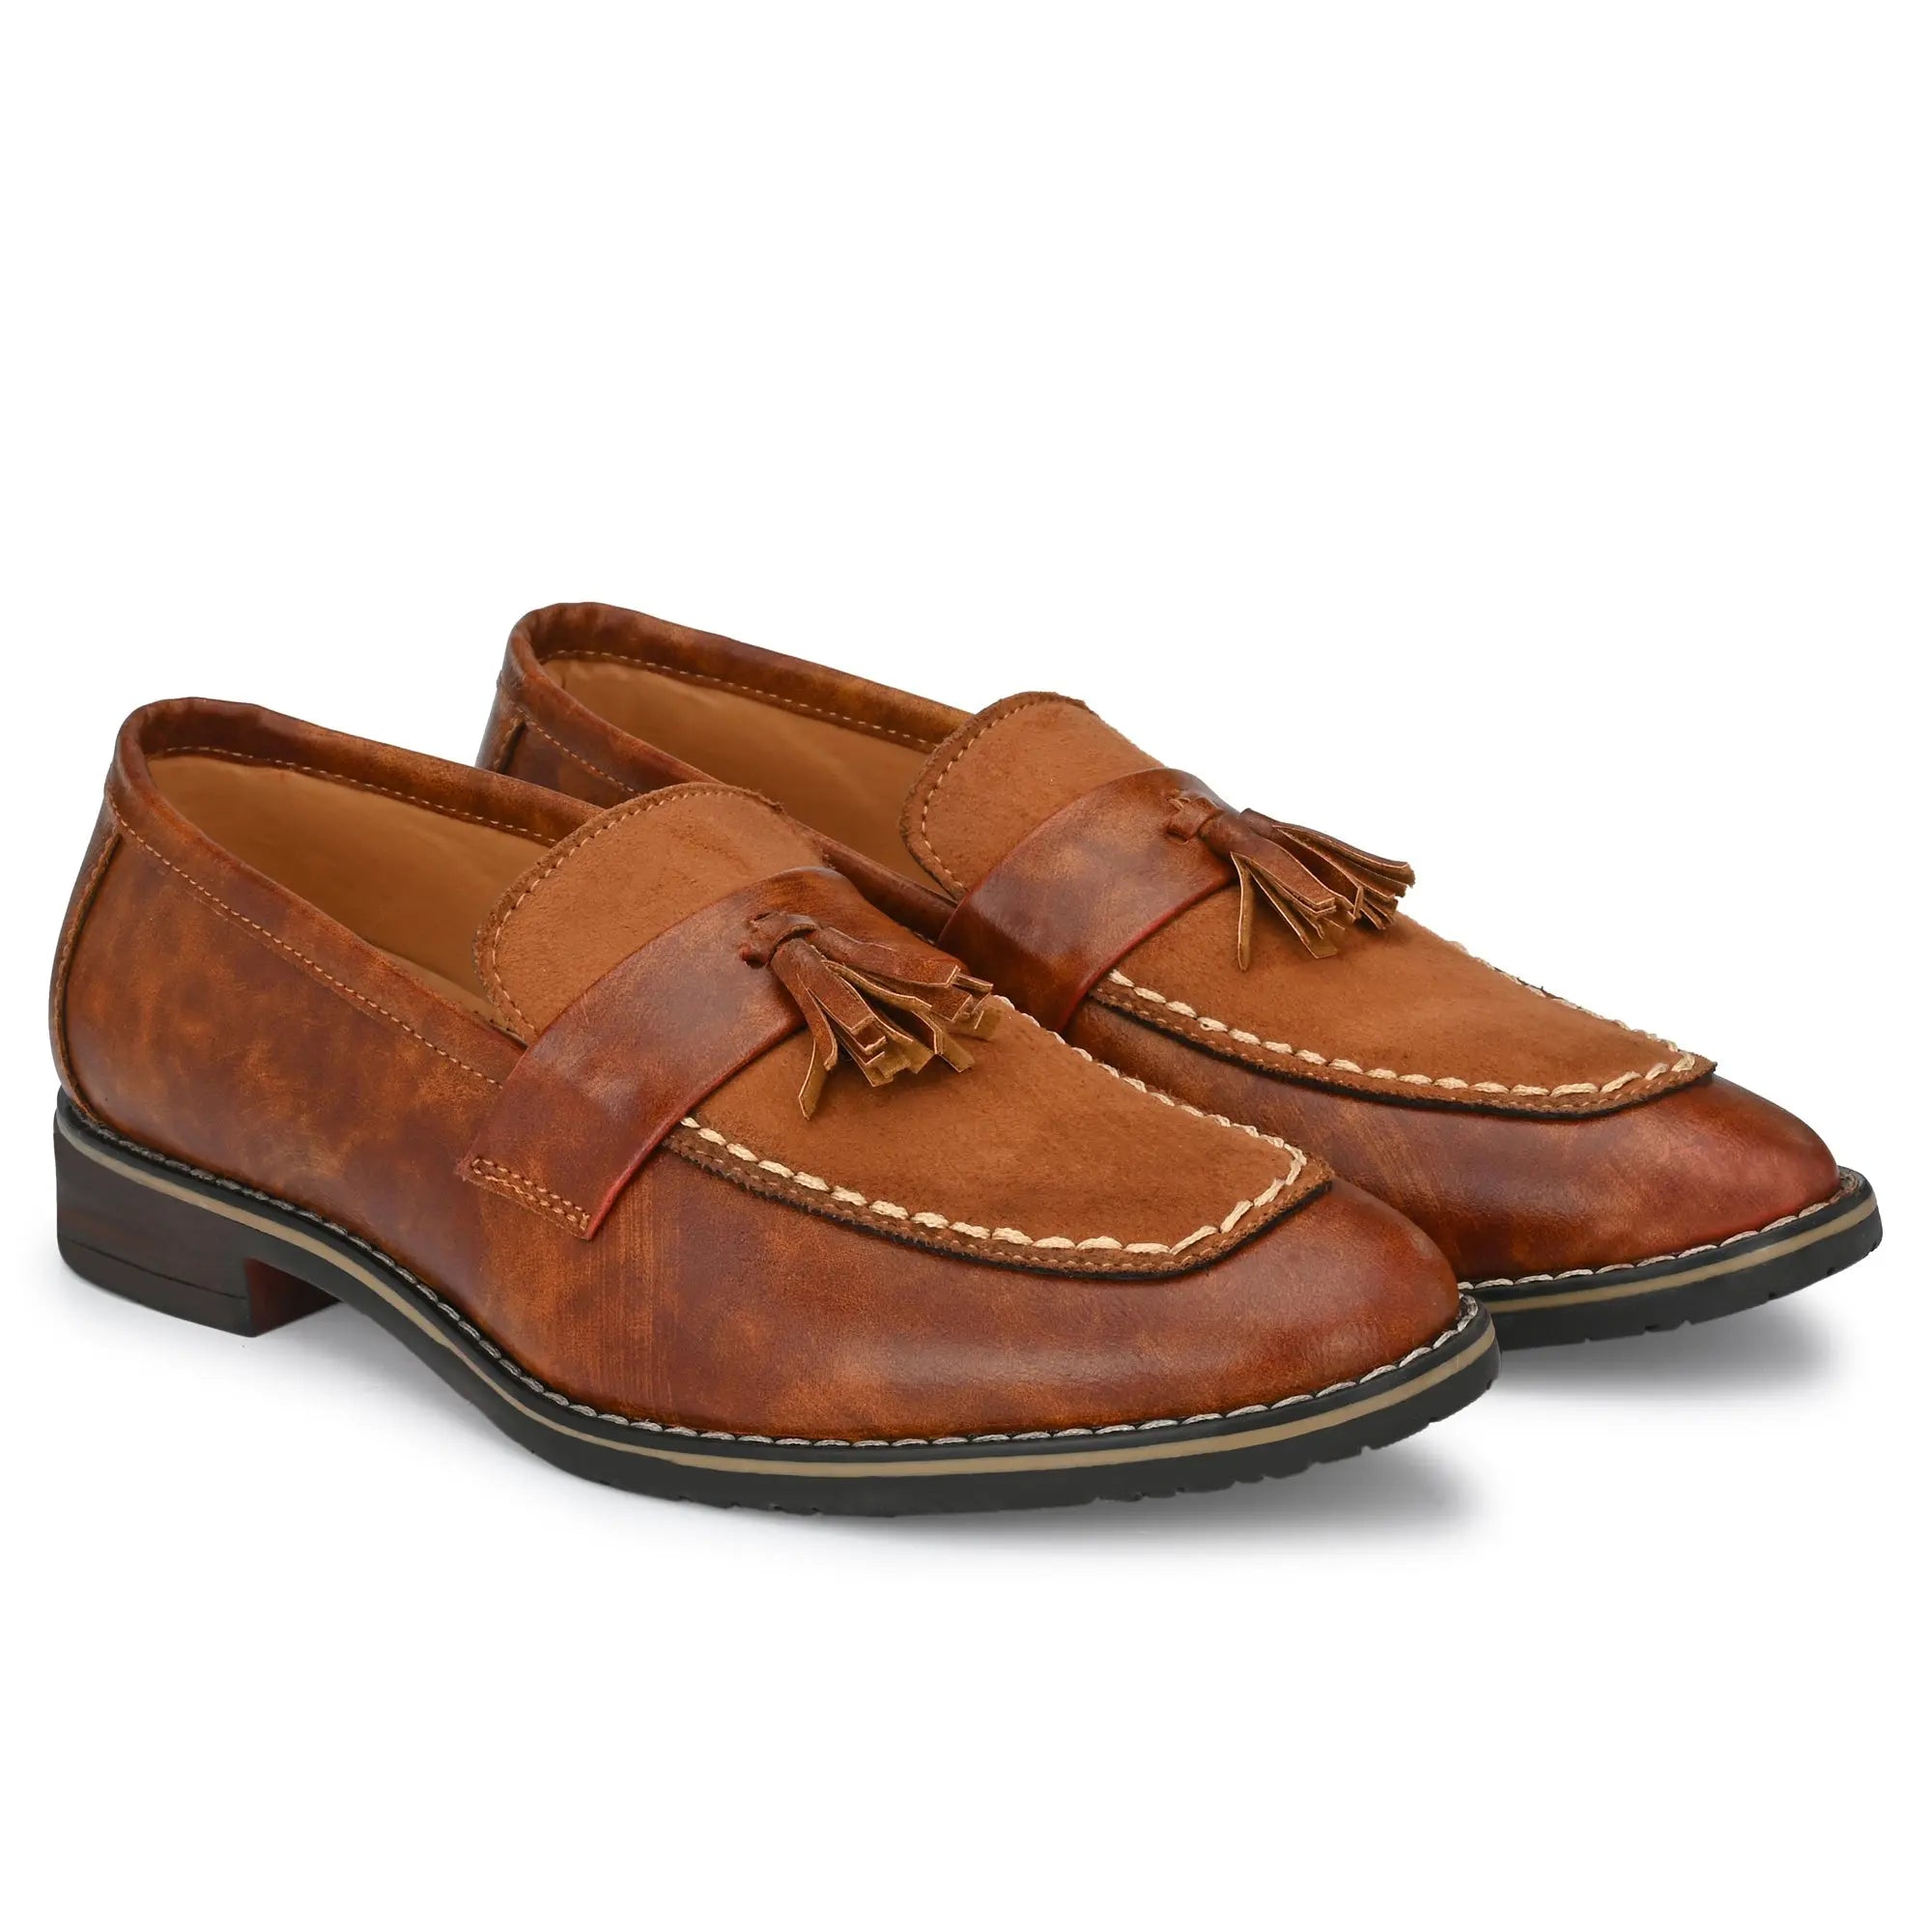 Attitudist Handcrafted Tan Plain Tassel Loafer With Knotted Laces In Mocassin Style For Men MTOBSF